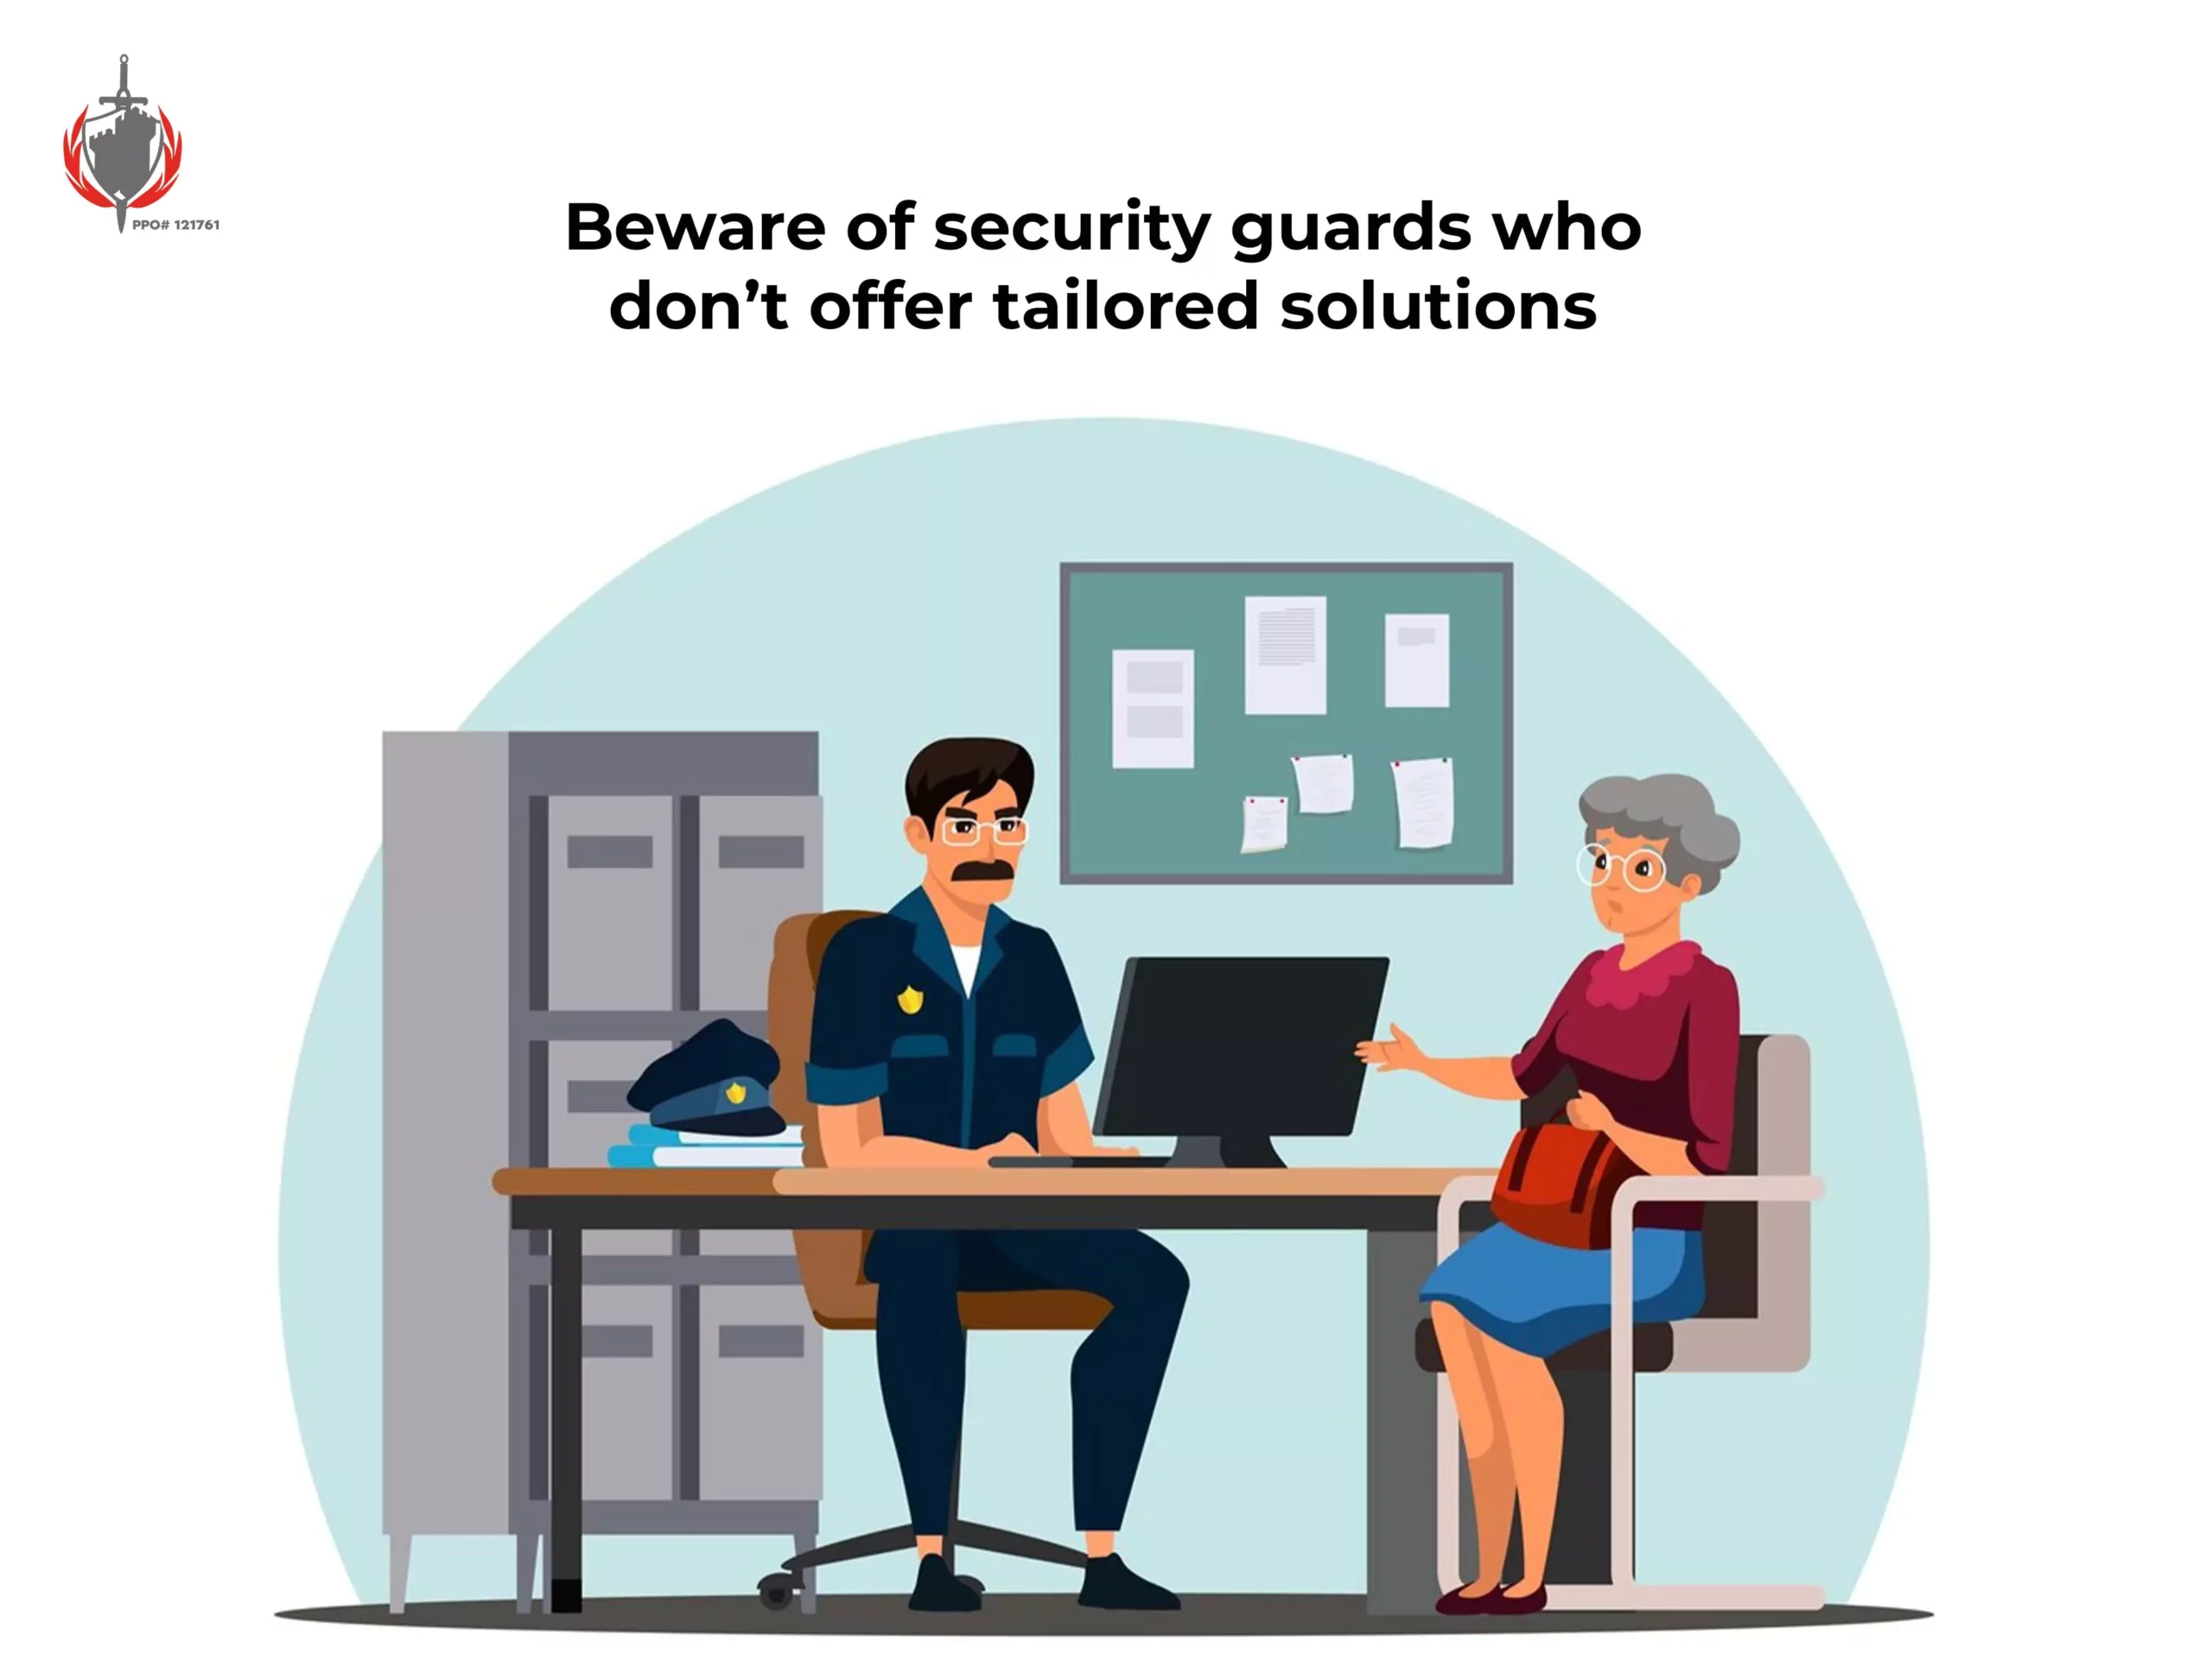 Beware of security guards who don’t offer tailored solutions